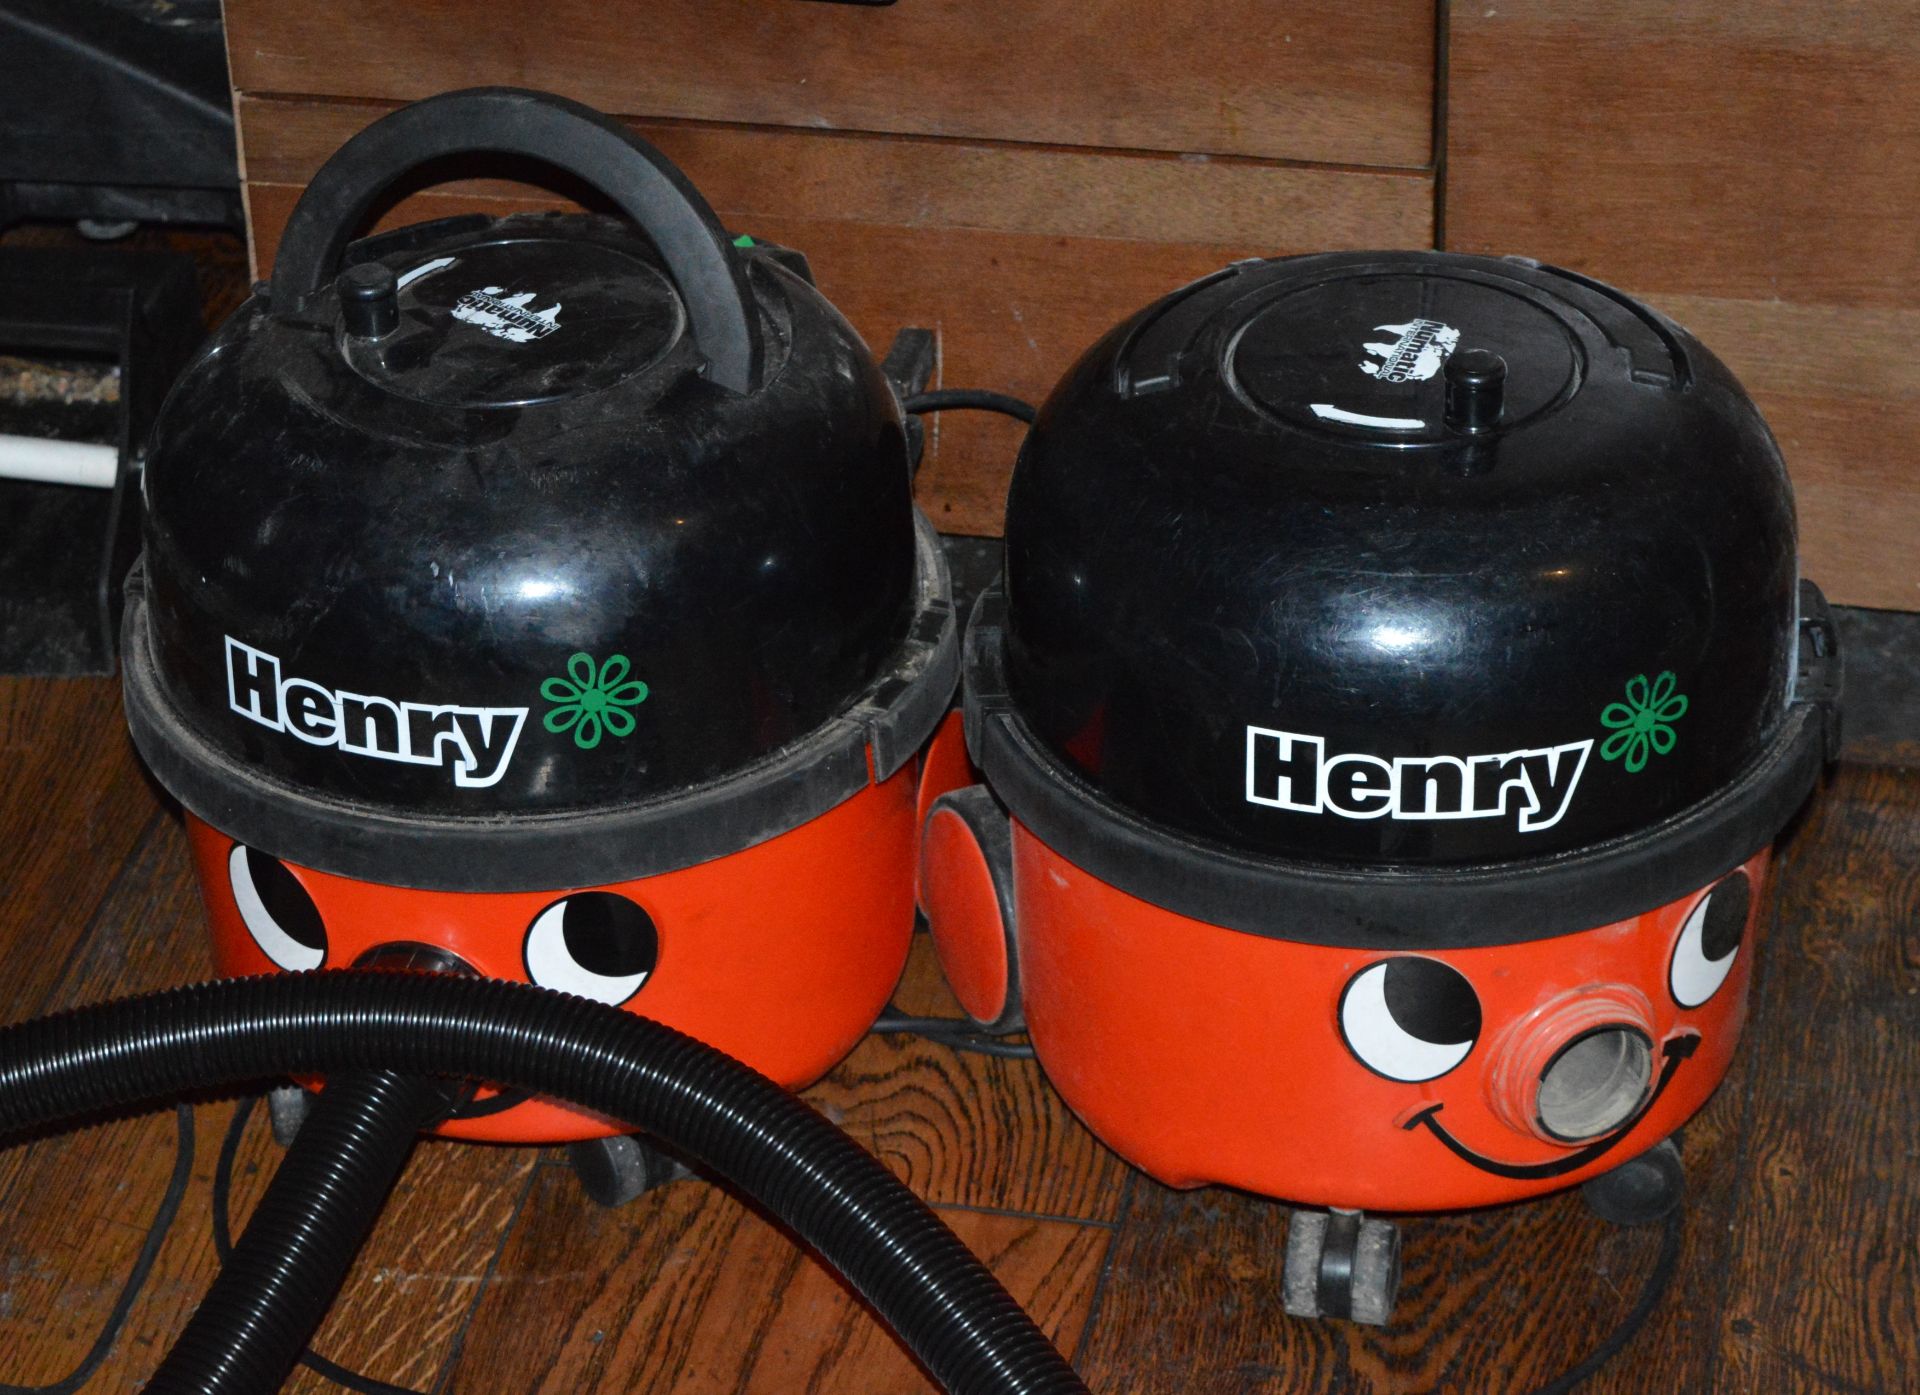 2 x Numatic Henry Hoovers With Accessories and Spare Hoover Bags - CL350 - Location: Cardiff CF10